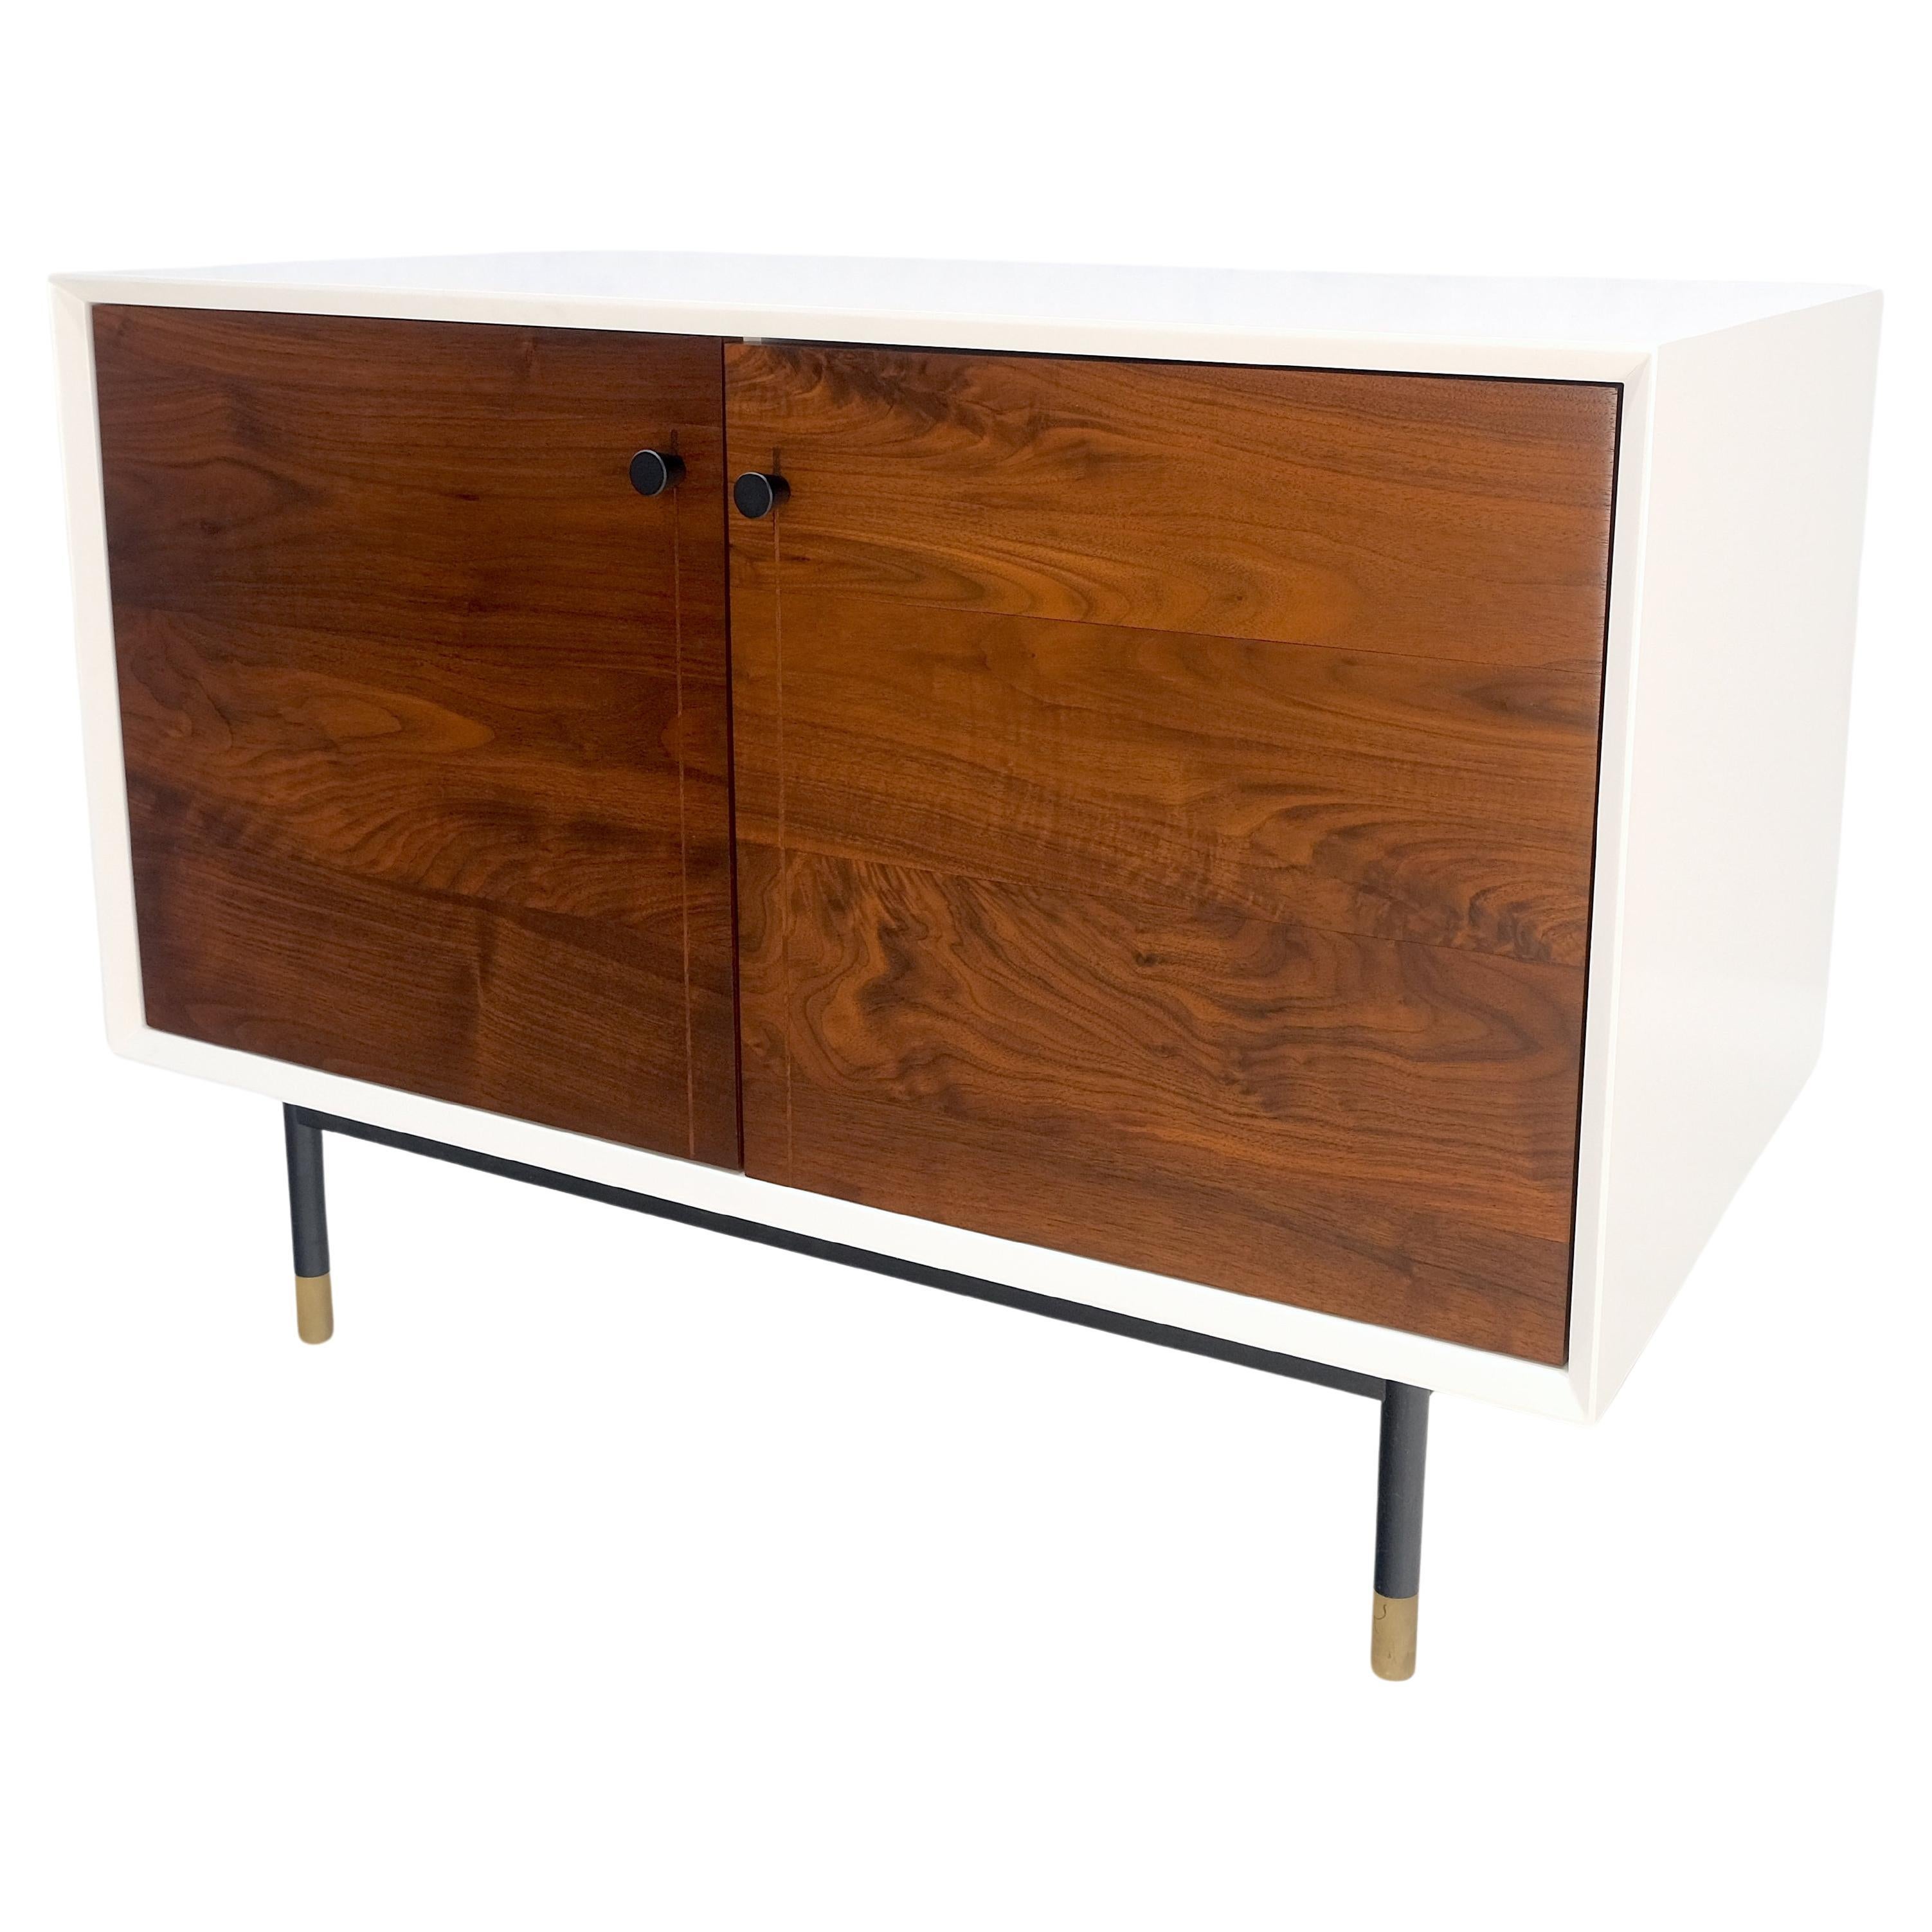 Mid-Century Modern White Lacquer Oiled Walnut Double Door Cylinder Legs Brass Tips Legs Credenza For Sale